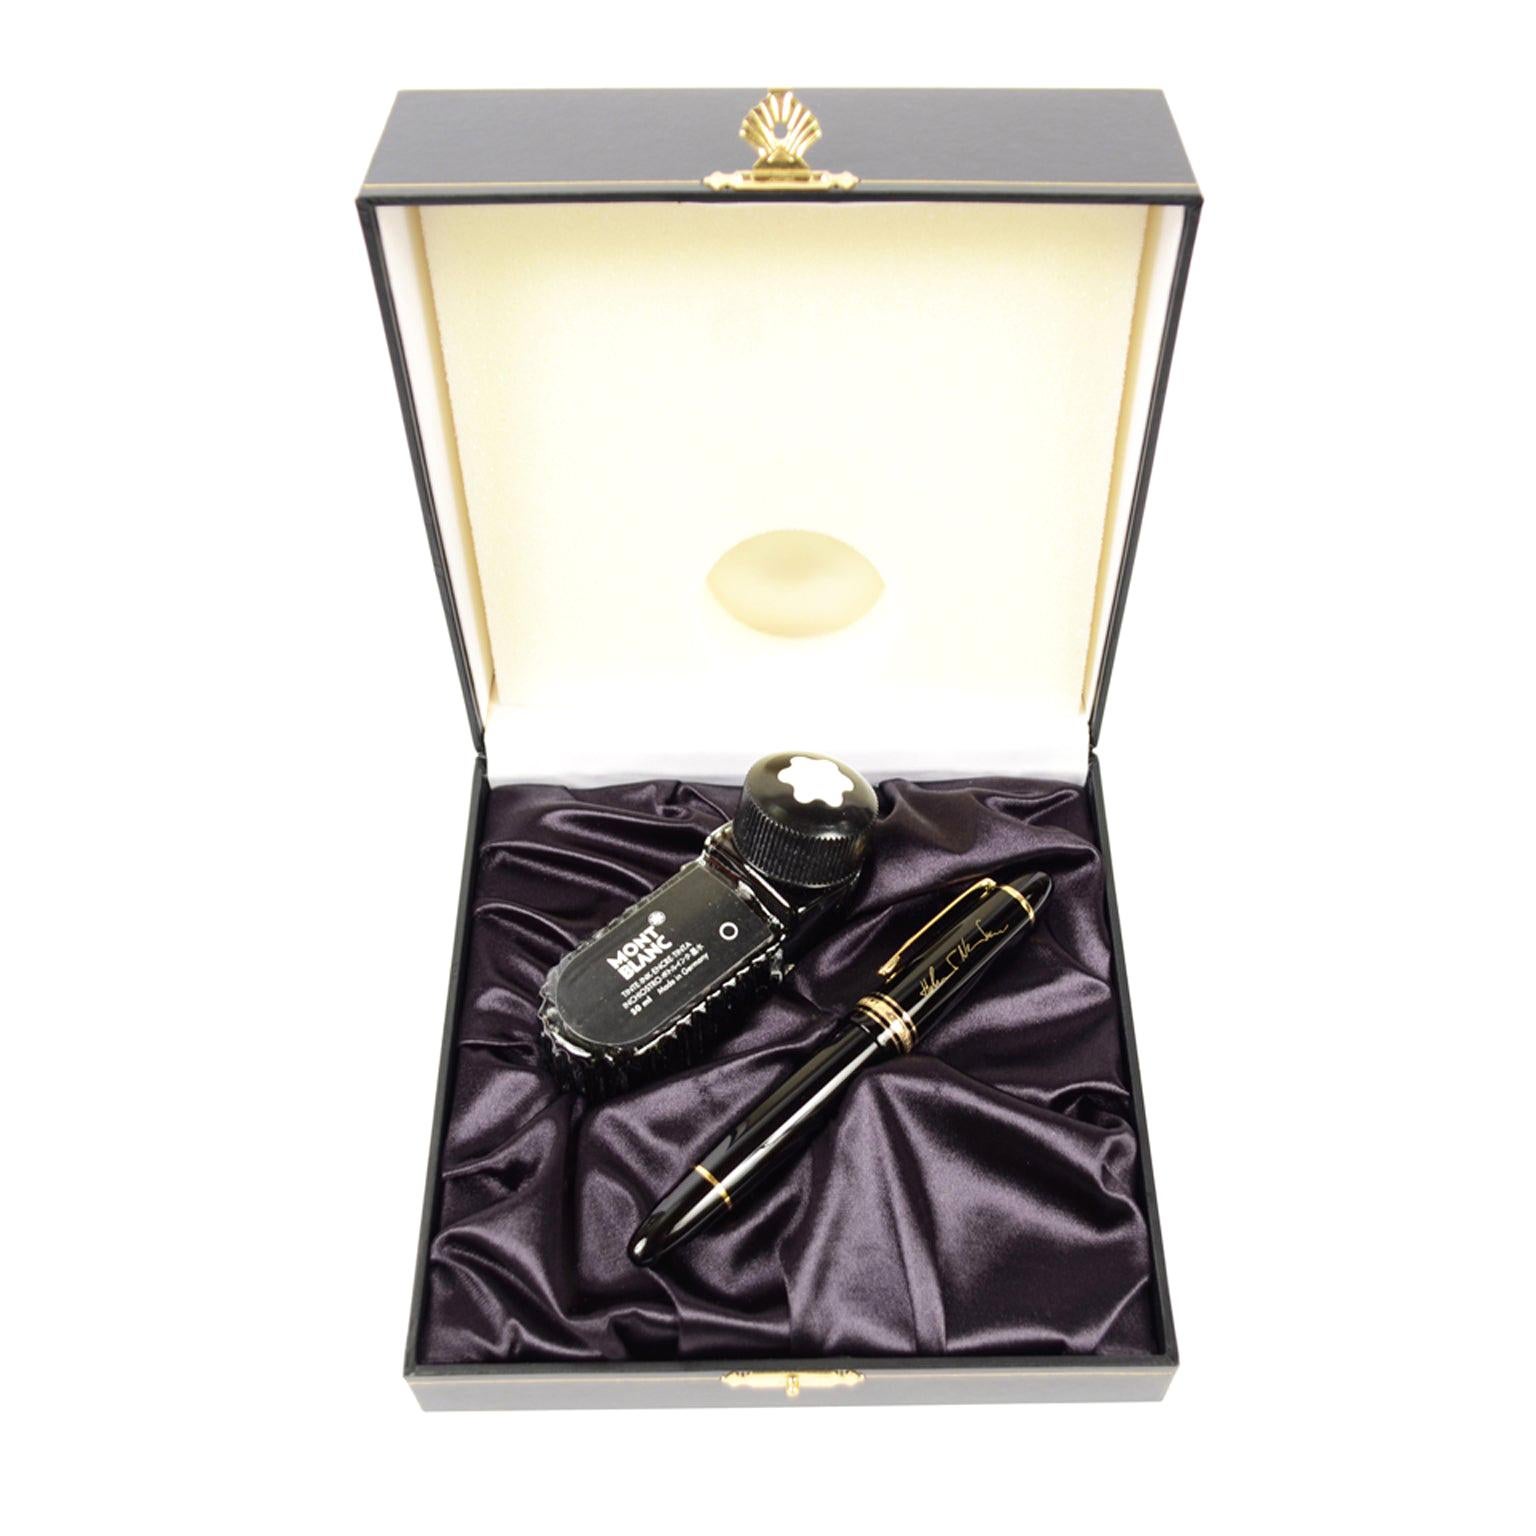 Mm Mont Blanc Meisterstuck 149 Signed by Helmut Newton